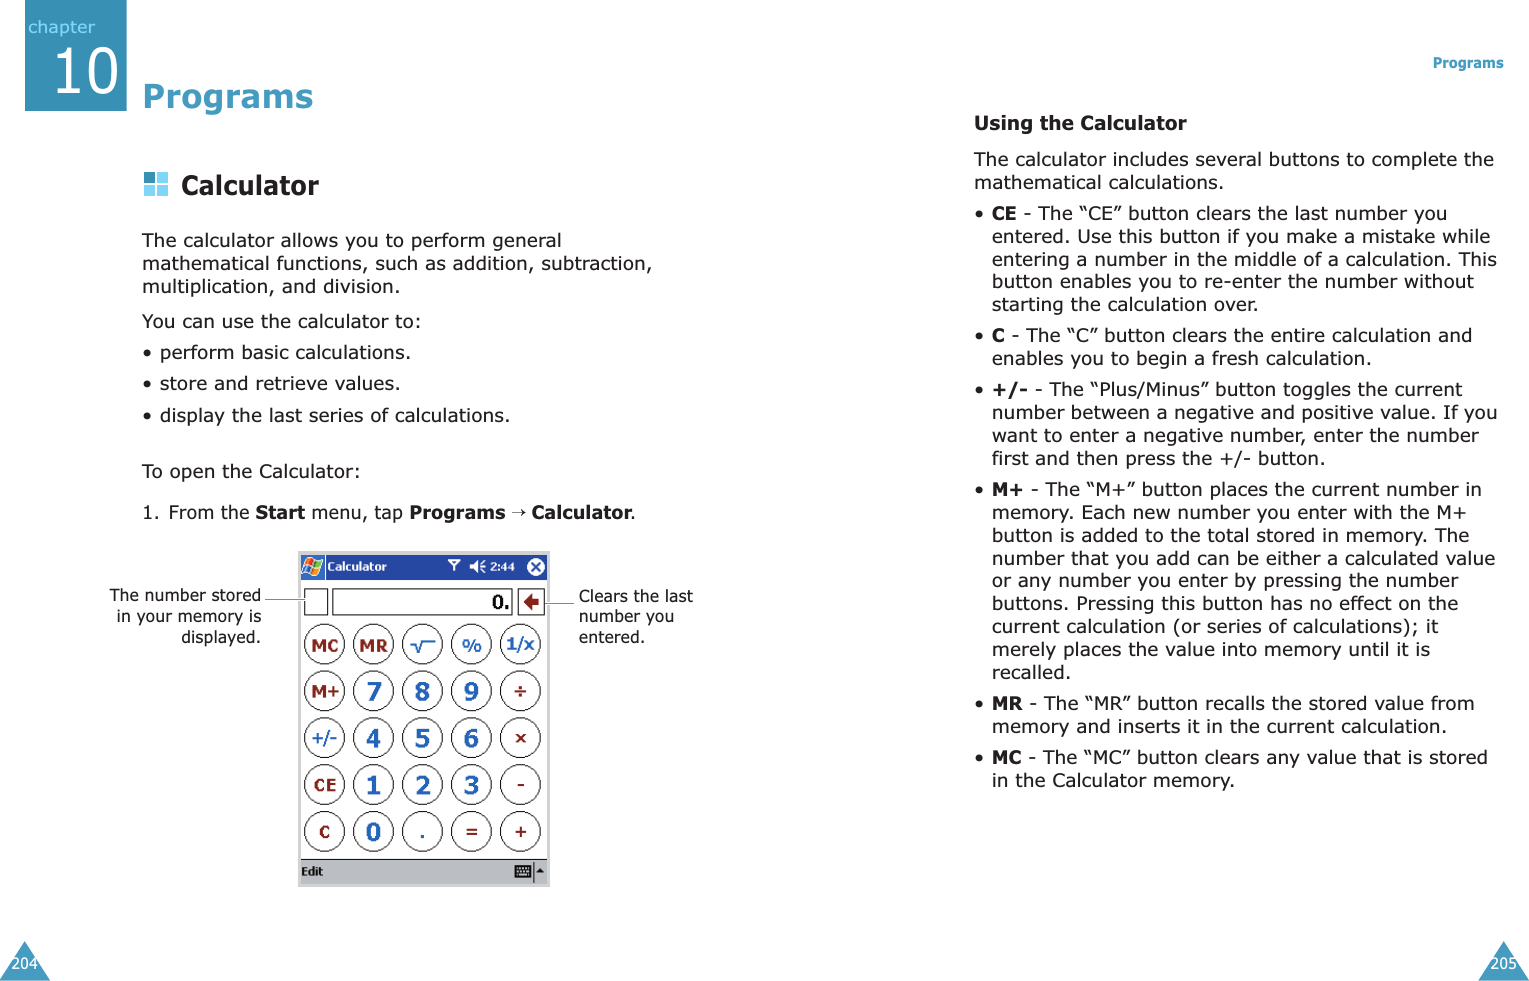 chapter20410ProgramsCalculatorThe calculator allows you to perform general mathematical functions, such as addition, subtraction, multiplication, and division.You can use the calculator to:• perform basic calculations.• store and retrieve values.• display the last series of calculations.To open the Calculator:1. From the Start menu, tap Programs → Calculator.The number storedin your memory isdisplayed.Clears the last number you entered.Programs205Using the CalculatorThe calculator includes several buttons to complete the mathematical calculations.•CE - The “CE” button clears the last number you entered. Use this button if you make a mistake while entering a number in the middle of a calculation. This button enables you to re-enter the number without starting the calculation over.•C - The “C” button clears the entire calculation and enables you to begin a fresh calculation.•+/- - The “Plus/Minus” button toggles the current number between a negative and positive value. If you want to enter a negative number, enter the number first and then press the +/- button.•M+ - The “M+” button places the current number in memory. Each new number you enter with the M+ button is added to the total stored in memory. The number that you add can be either a calculated value or any number you enter by pressing the number buttons. Pressing this button has no effect on the current calculation (or series of calculations); it merely places the value into memory until it is recalled.•MR - The “MR” button recalls the stored value from memory and inserts it in the current calculation.•MC - The “MC” button clears any value that is stored in the Calculator memory.